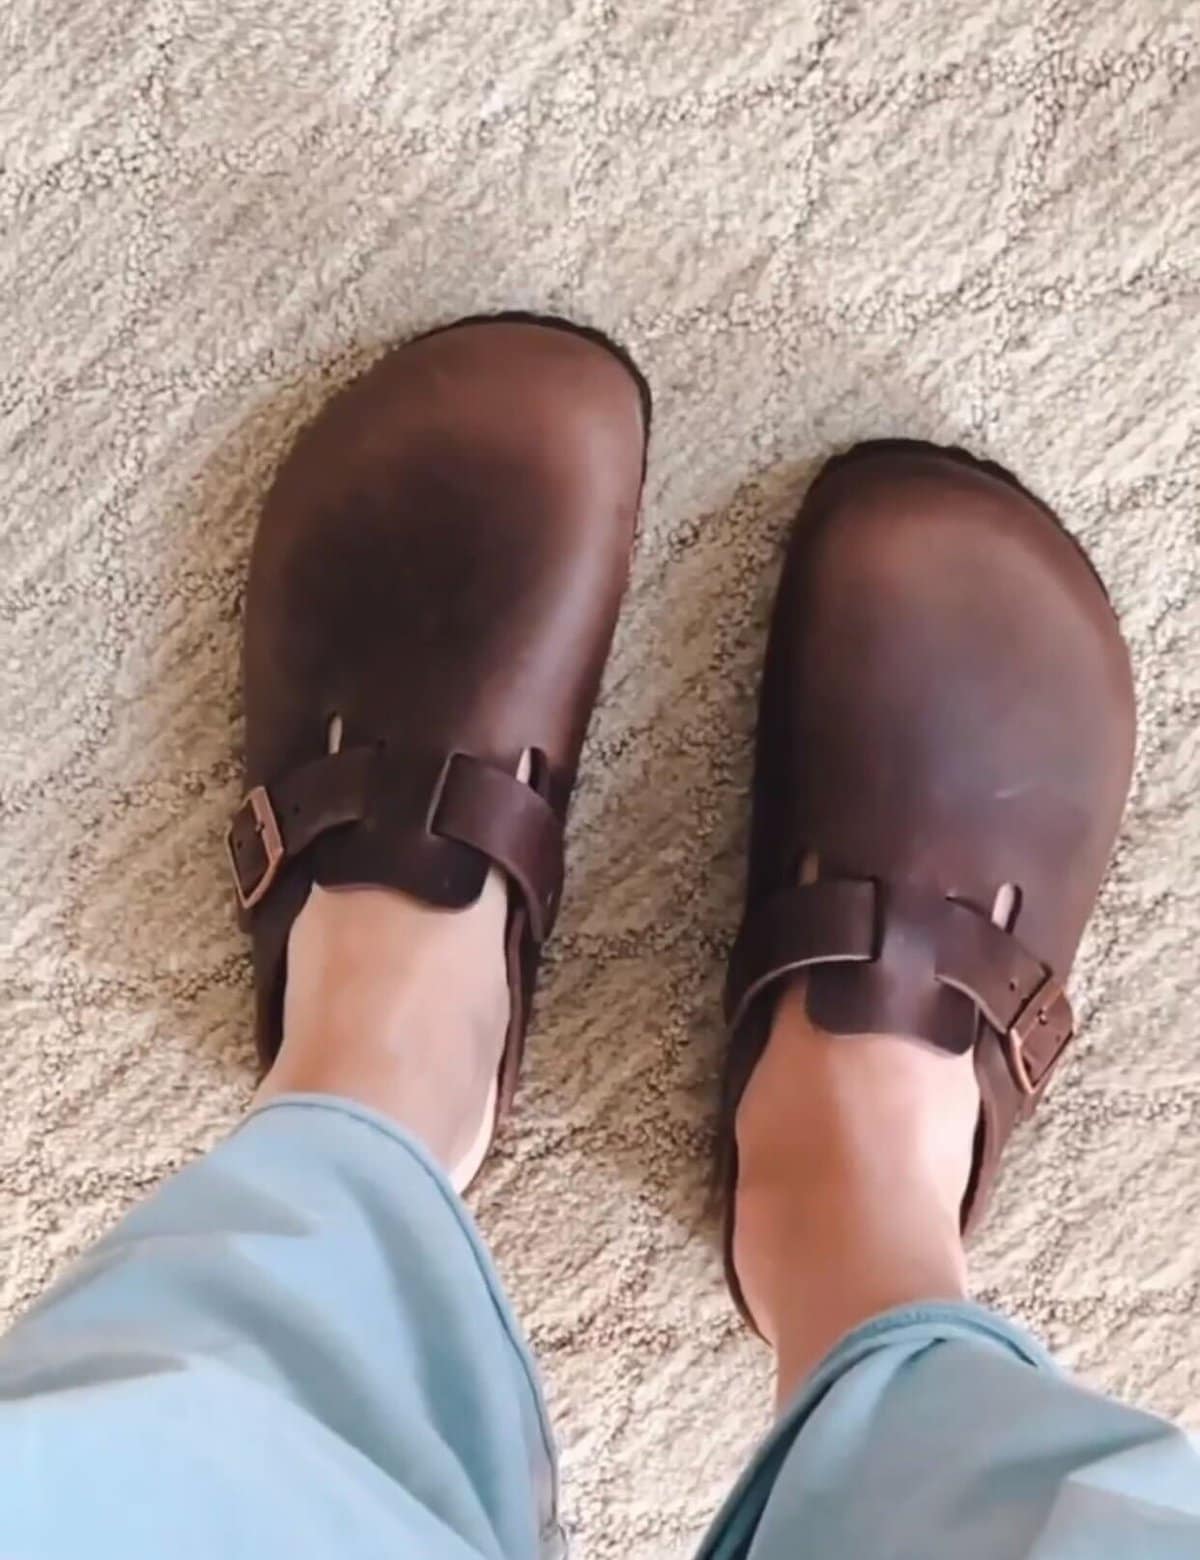 Birkenstock slippers are having a moment, here's how to style them